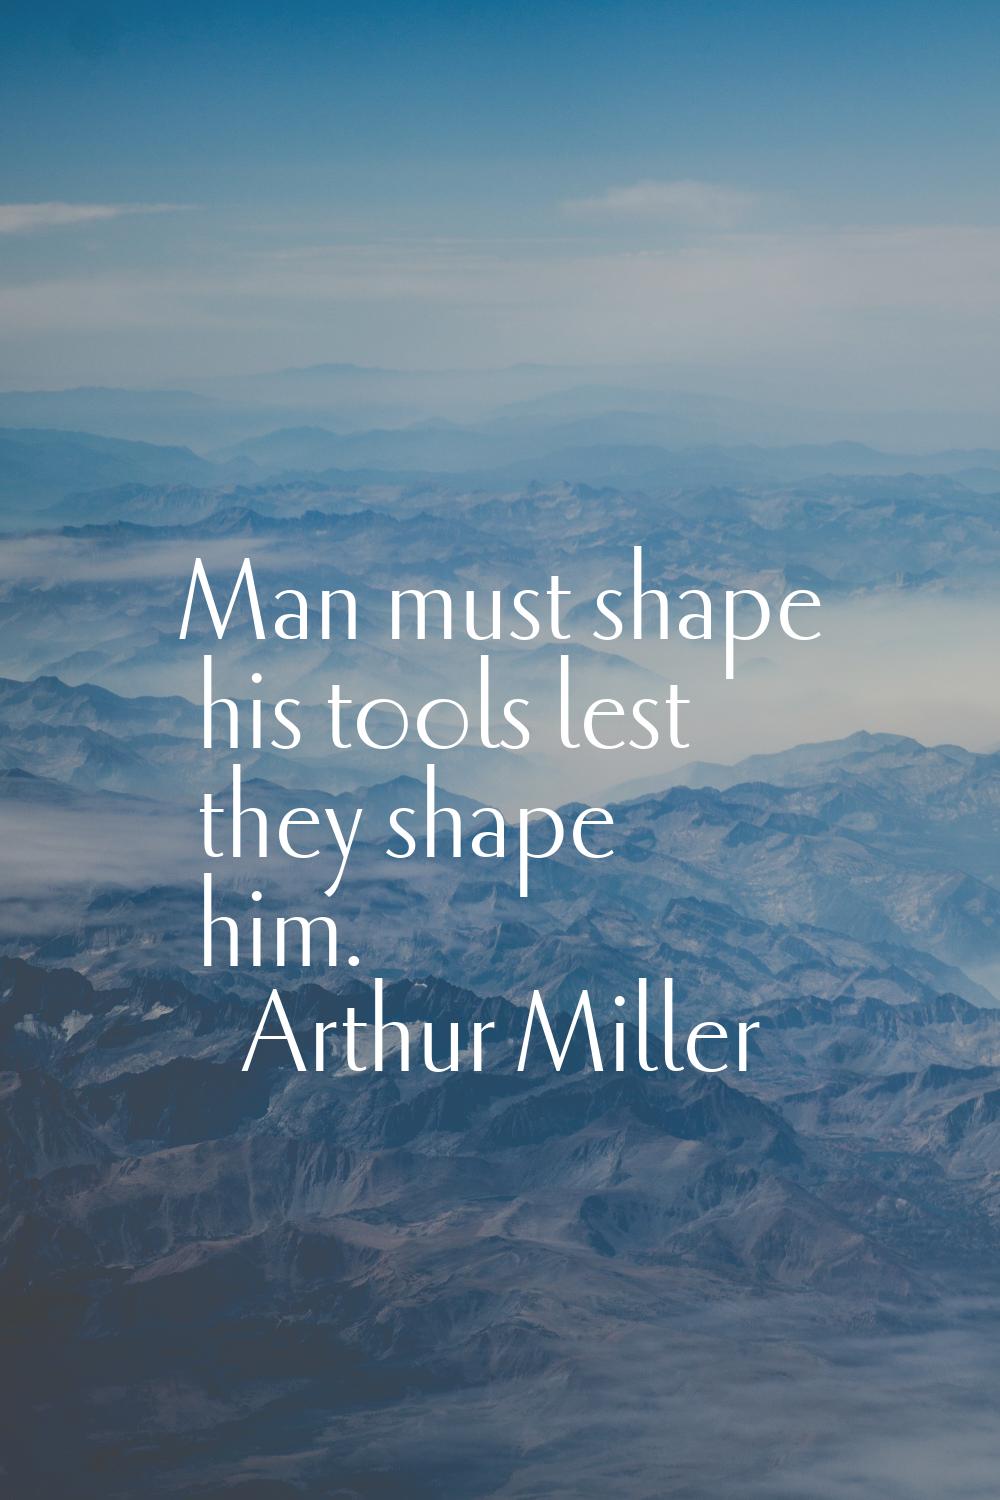 Man must shape his tools lest they shape him.